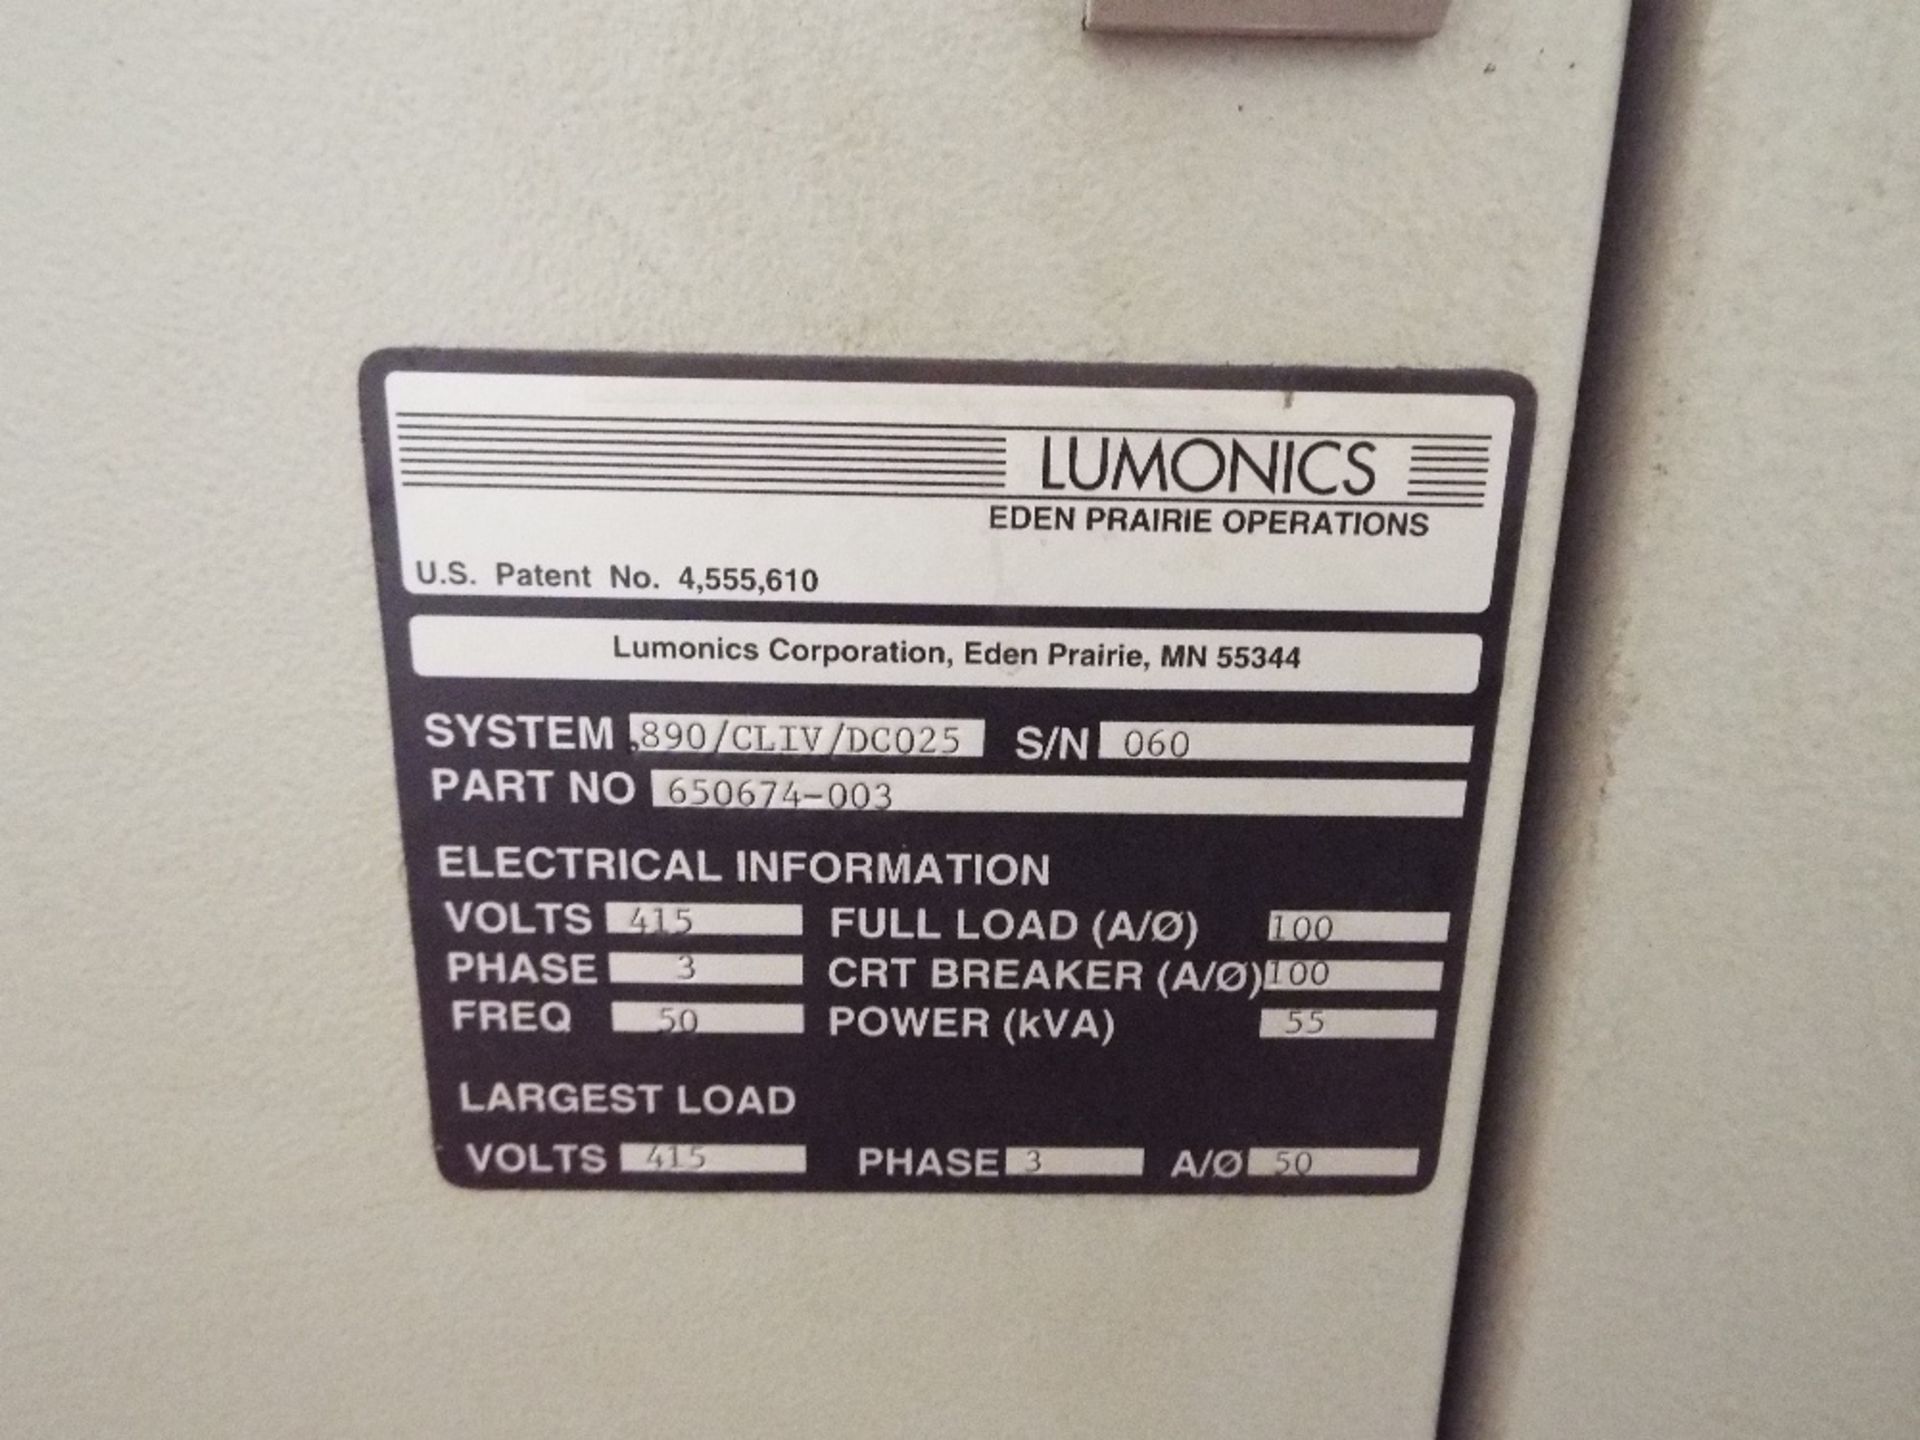 Lumonics Laserdyne 890 Beam Director Multiaxis Laser System cw Dust Extractor and Chilling Unit. - Image 14 of 36